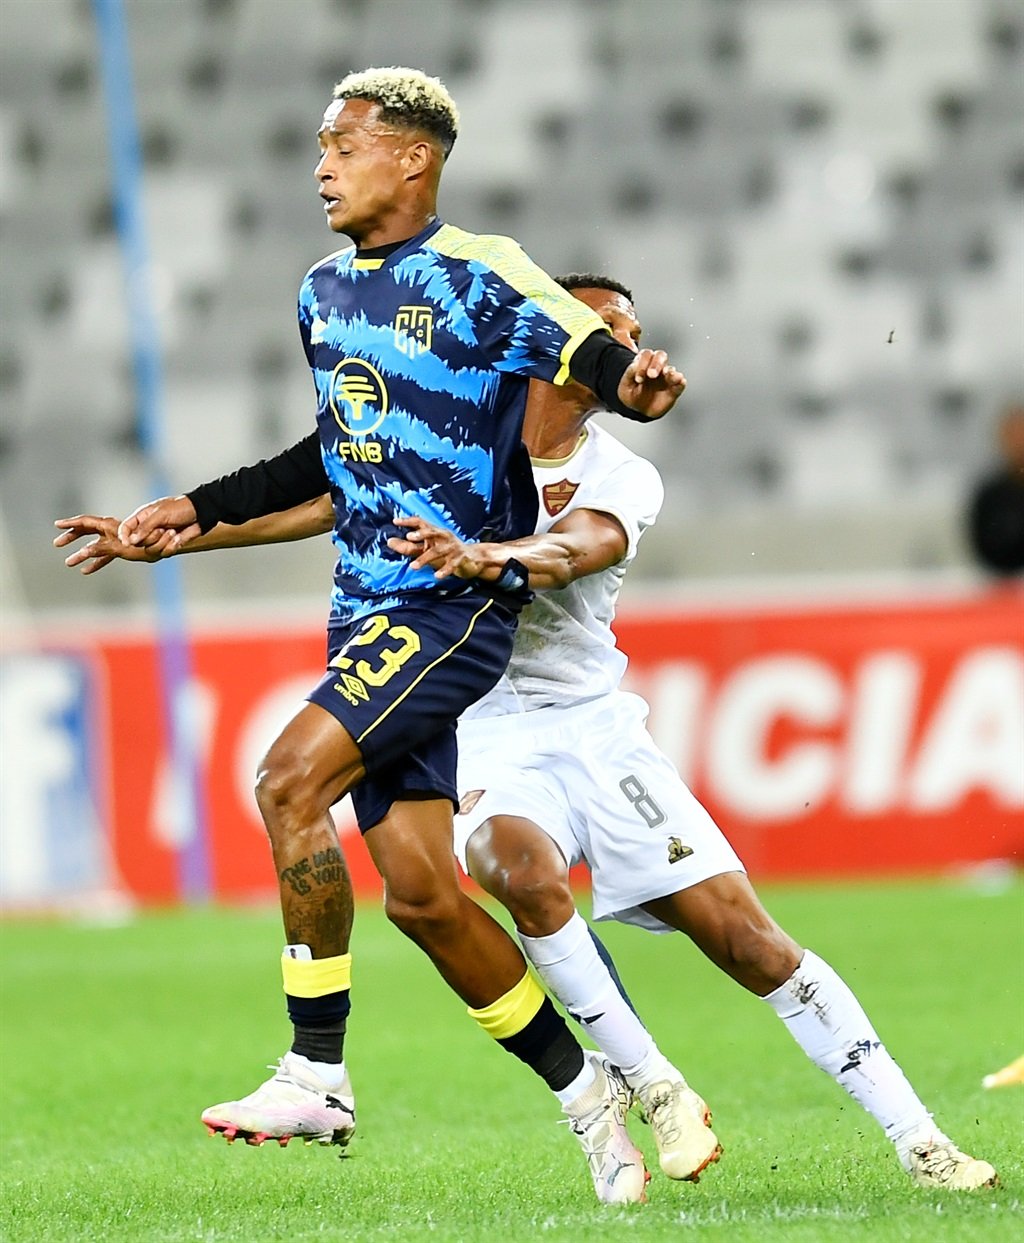 CAPE TOWN, SOUTH AFRICA - MARCH 05: Jaedin Rhodes of Cape Town City and Sihle Nduli of Stellenbosch FC during the DStv Premiership match between Cape Town City FC and Stellenbosch FC at DHL Cape Town Stadium on March 05, 2024 in Cape Town, South Africa. (Photo by Ashley Vlotman/Gallo Images)